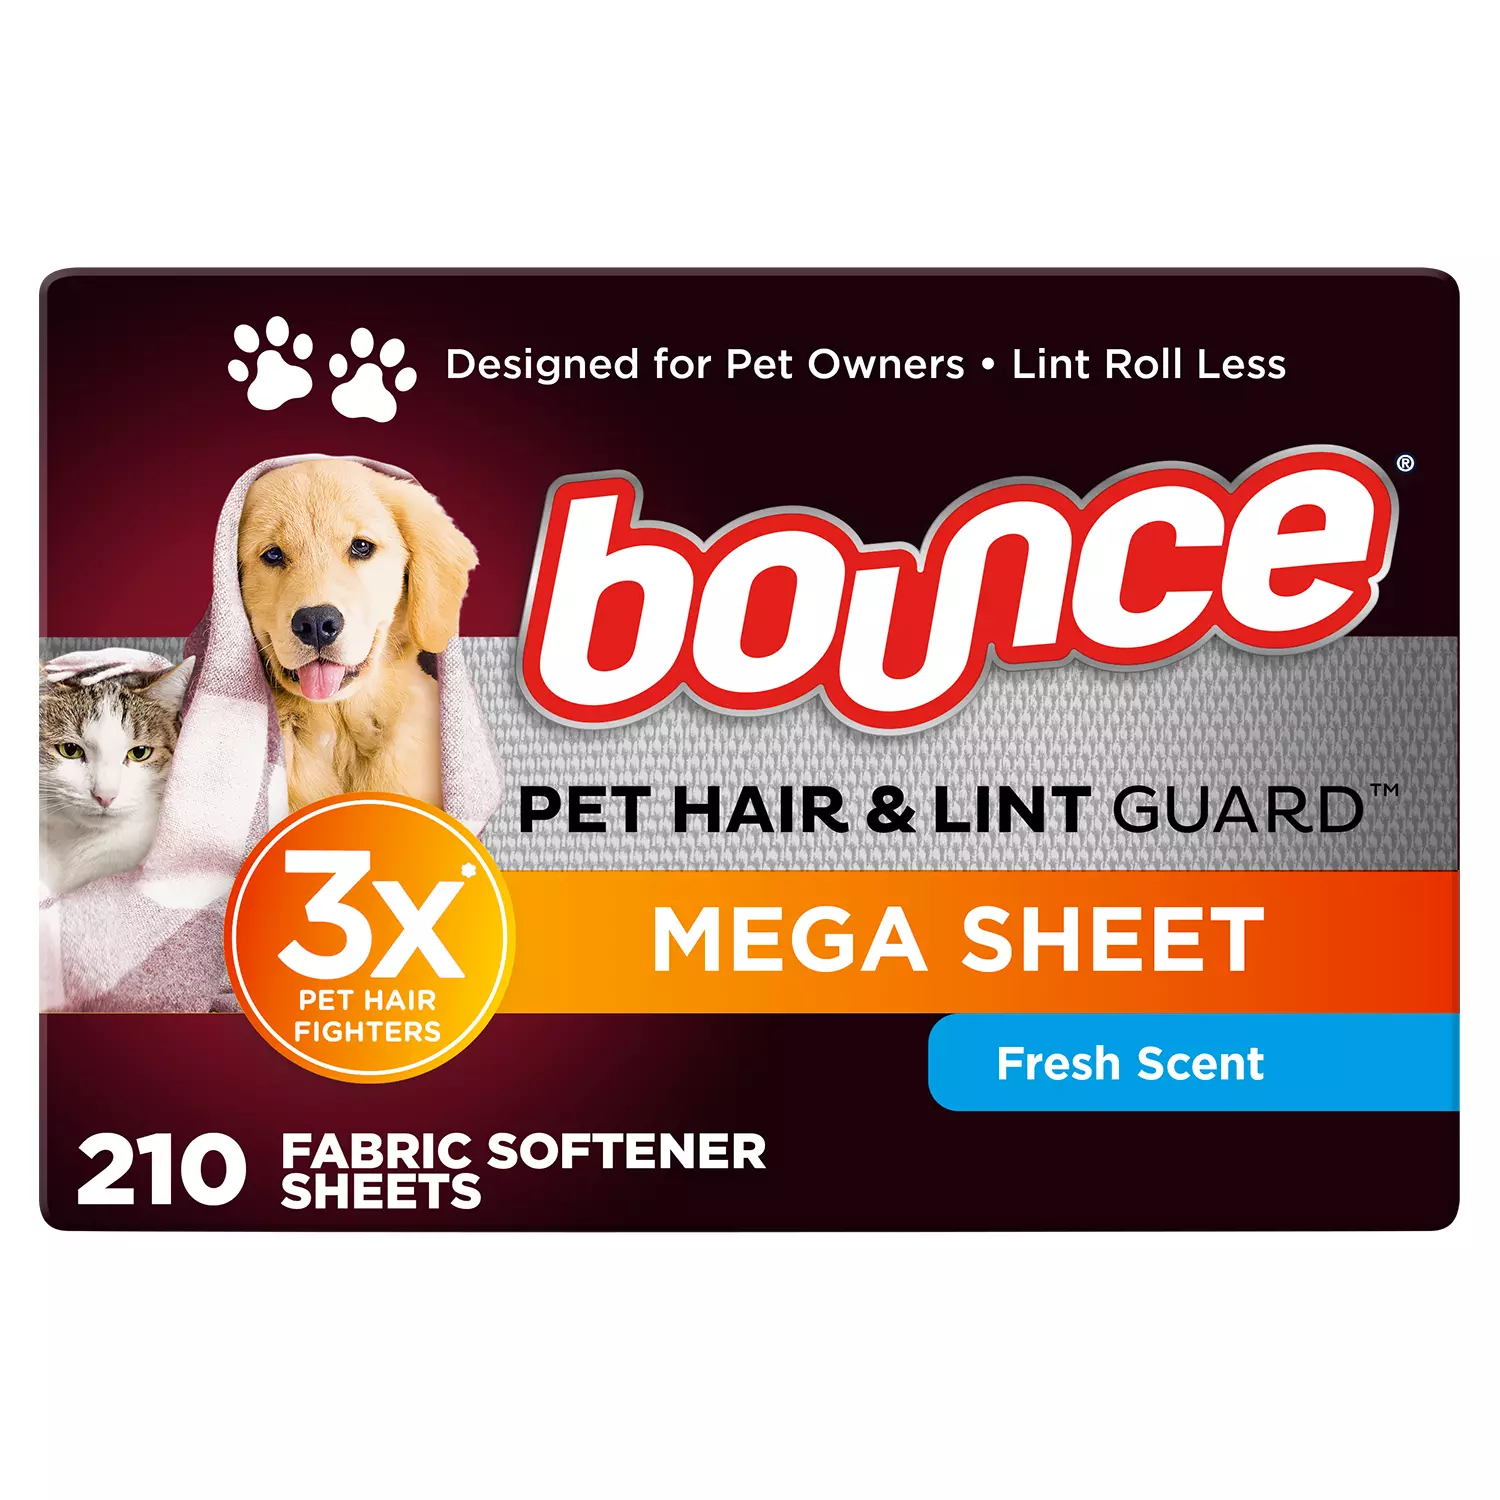 Bounce Pet Hair and Lint Guard Mega Dryer Sheets with 3X Pet Hair Fighters, Fresh Scent (210 sheets)